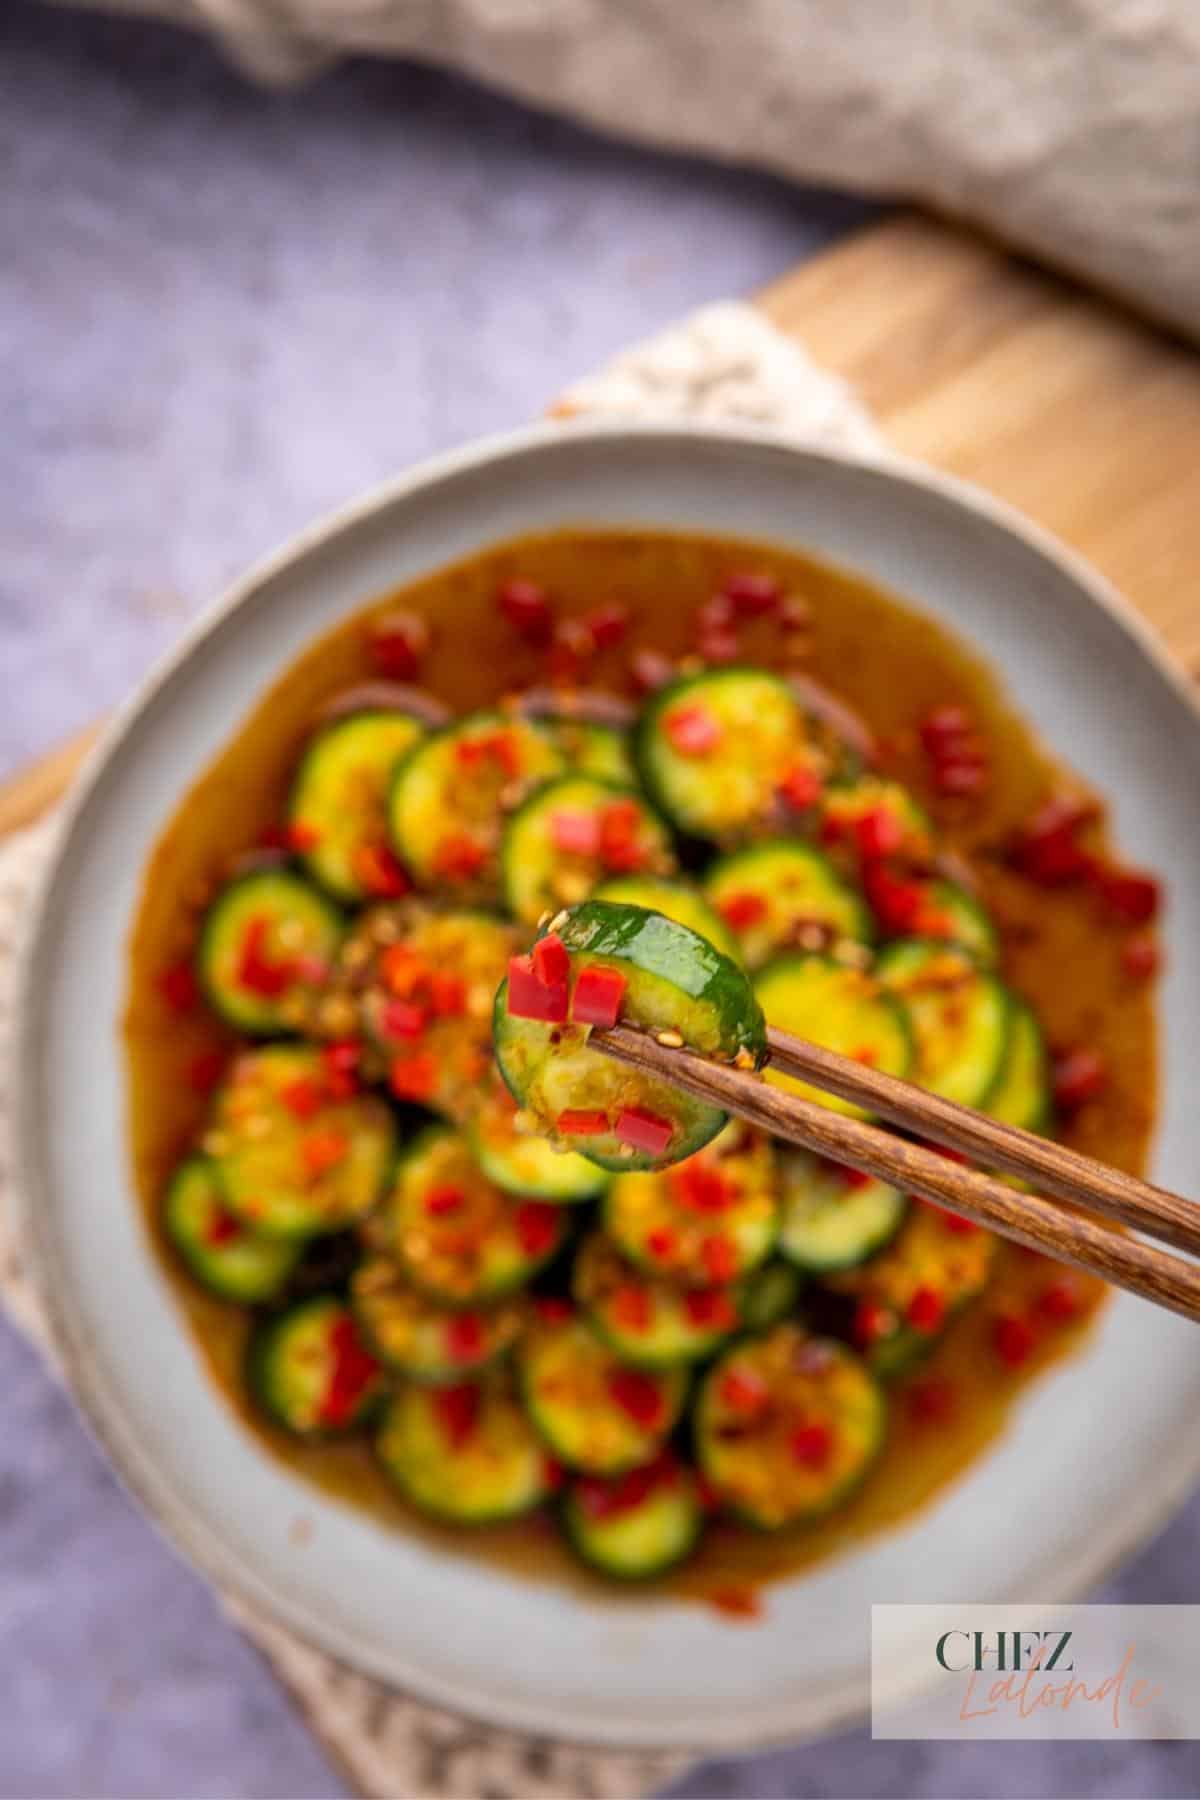 A pair of chopstick is holding a slice of Asian cucumber. 